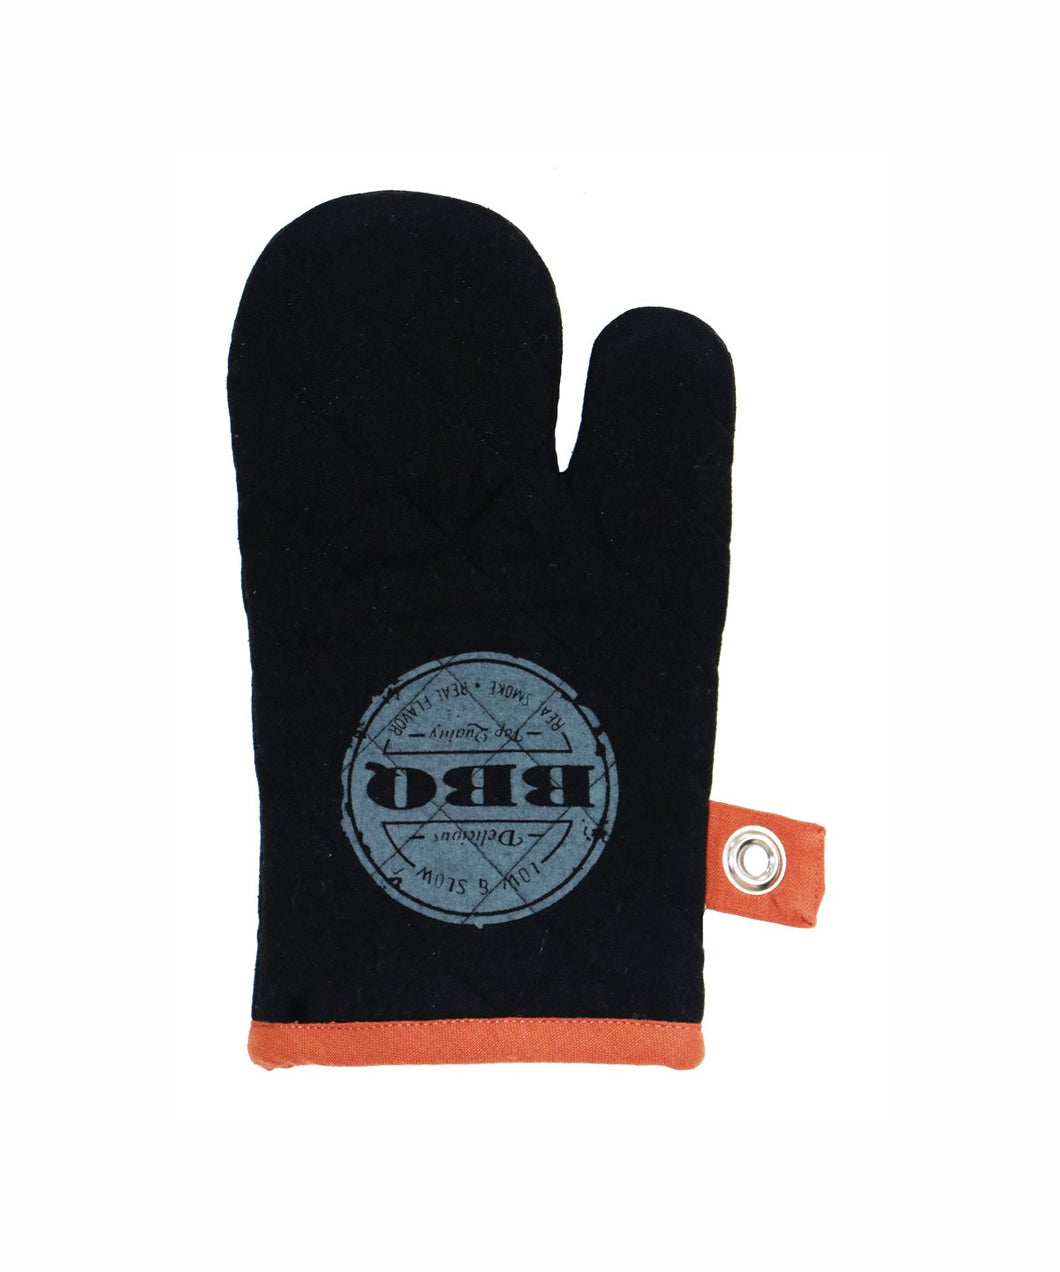 Get ready for a summer of bbq fun!  These BBQ Mitt pairs are great for all grilling enthusiasts and chefs alike. Pair them with our bbq apron, towel and grill press for a great Father's Day, Host or Just Because gift.  Size:  13